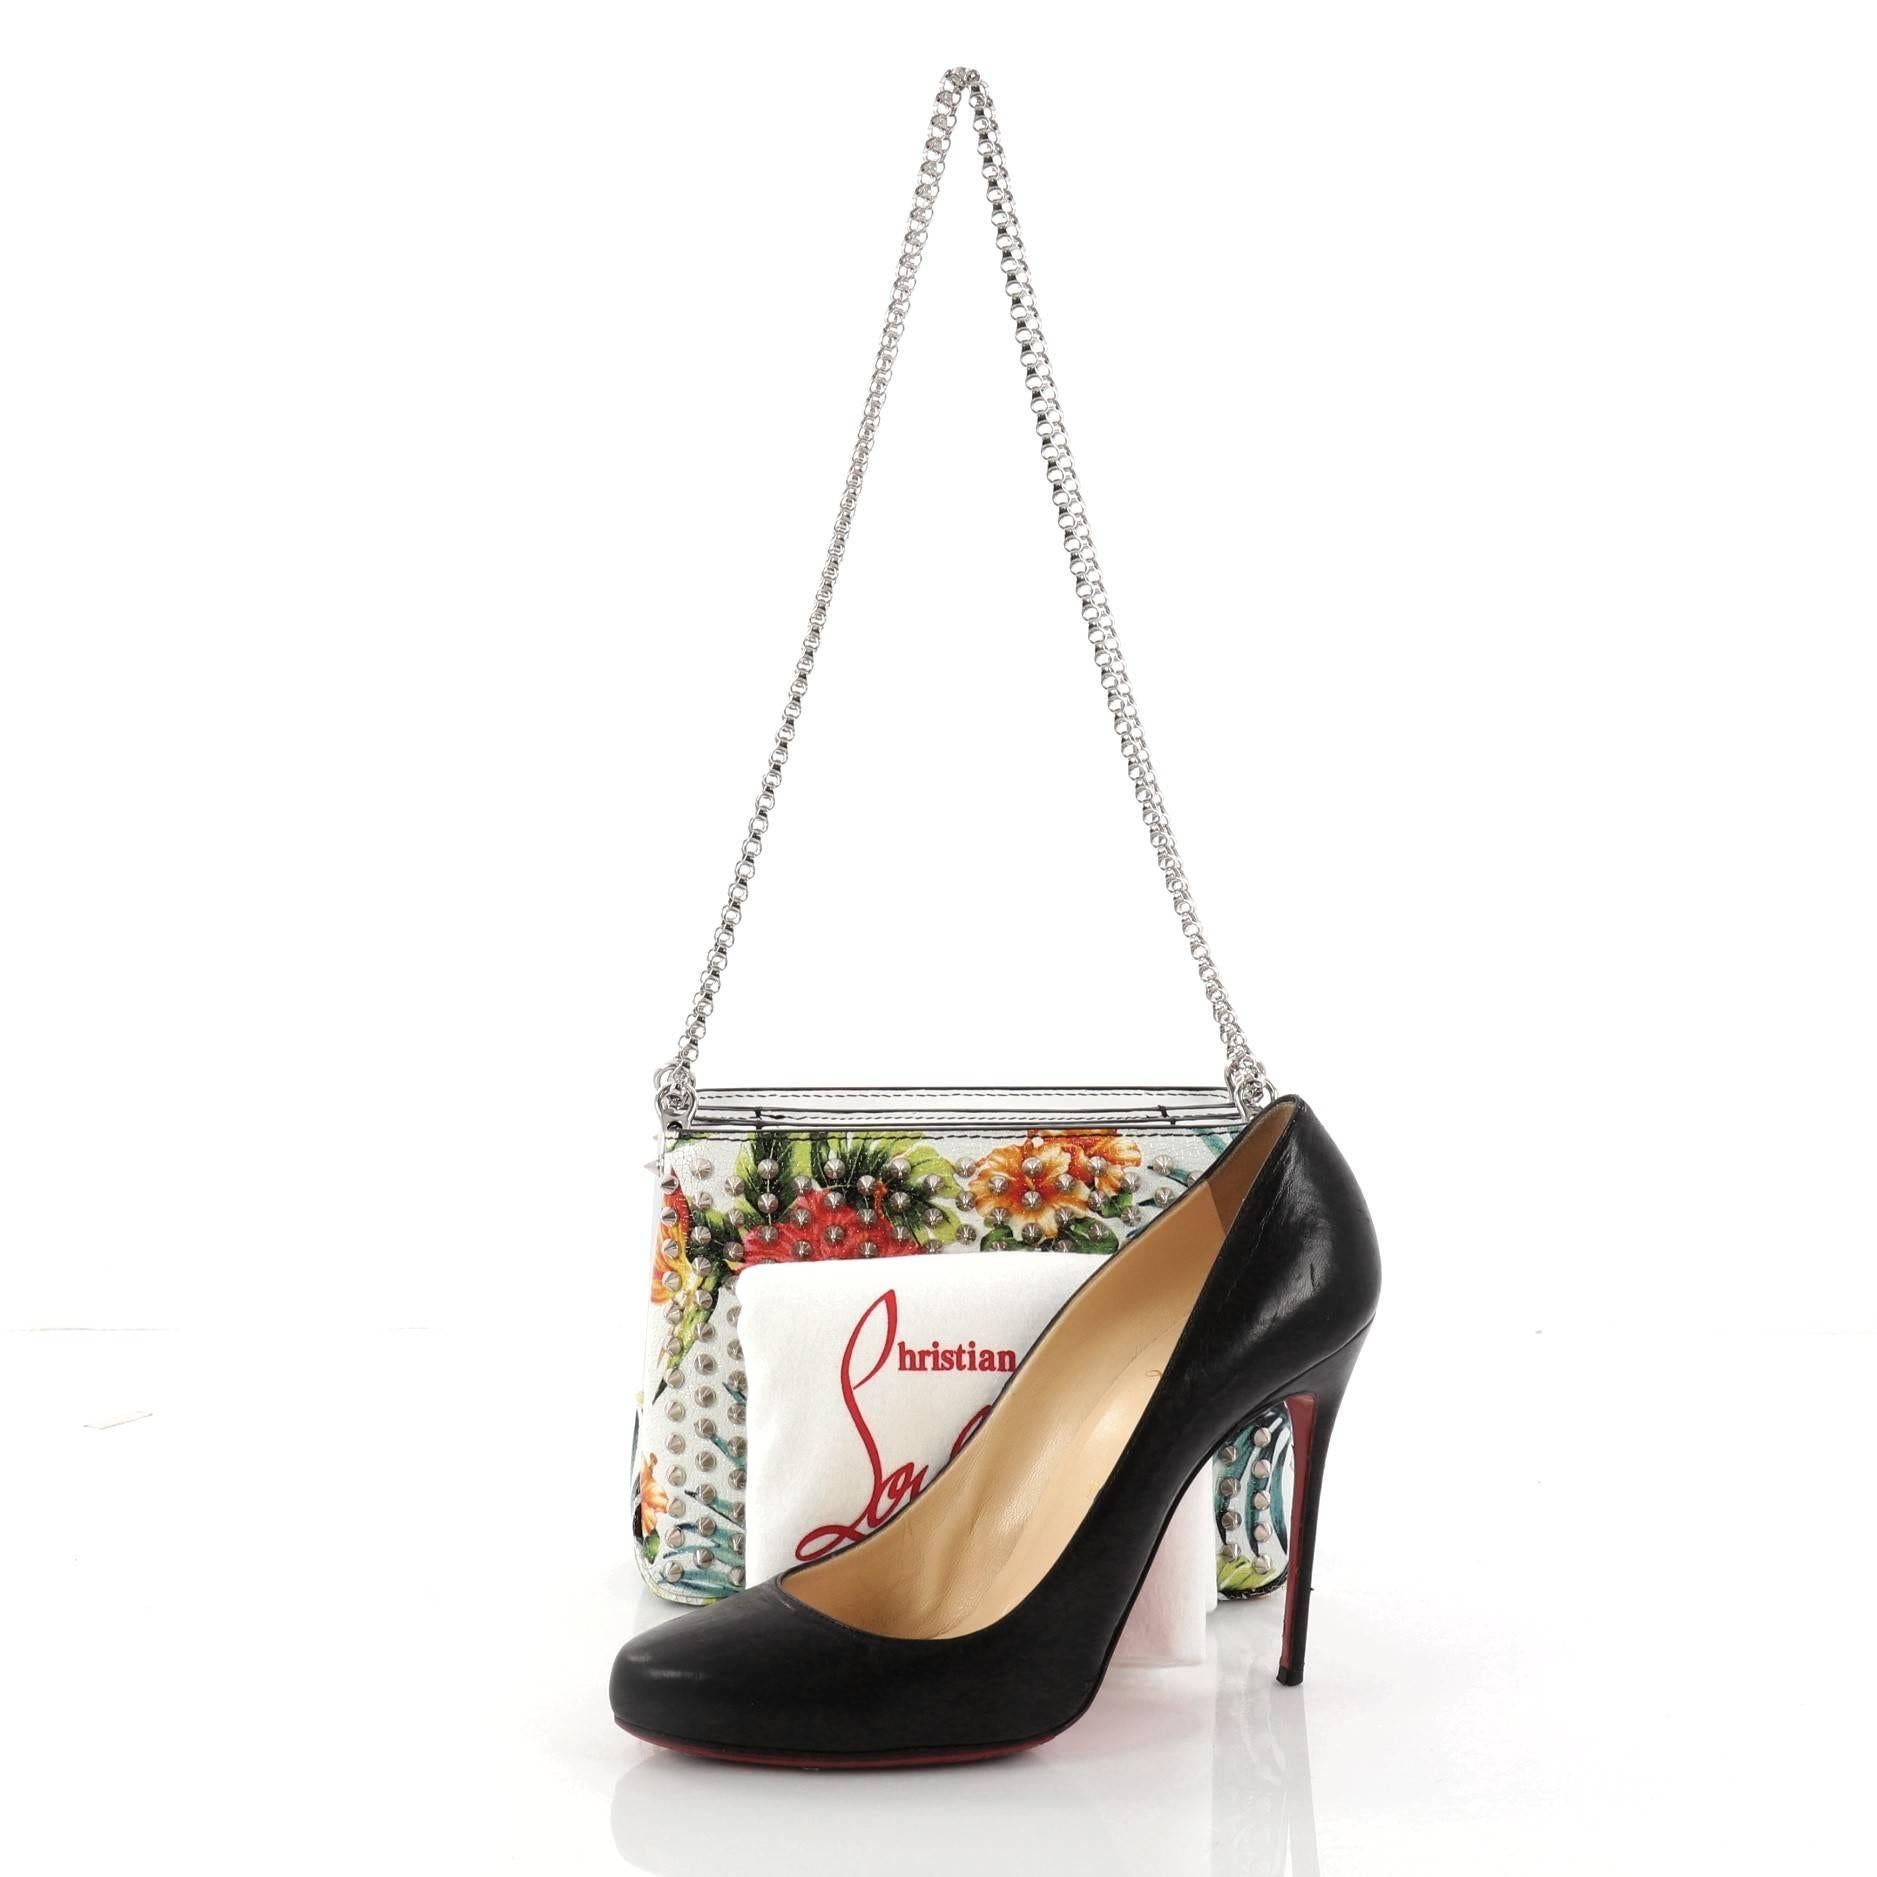 This authentic Christian Louboutin Triloubi Chain Bag Printed Leather Small balances an edgy-chic design with feminine flair perfect for nights out. Crafted in white floral printed leather, this day-to-night chain bag features Louboutin's signature